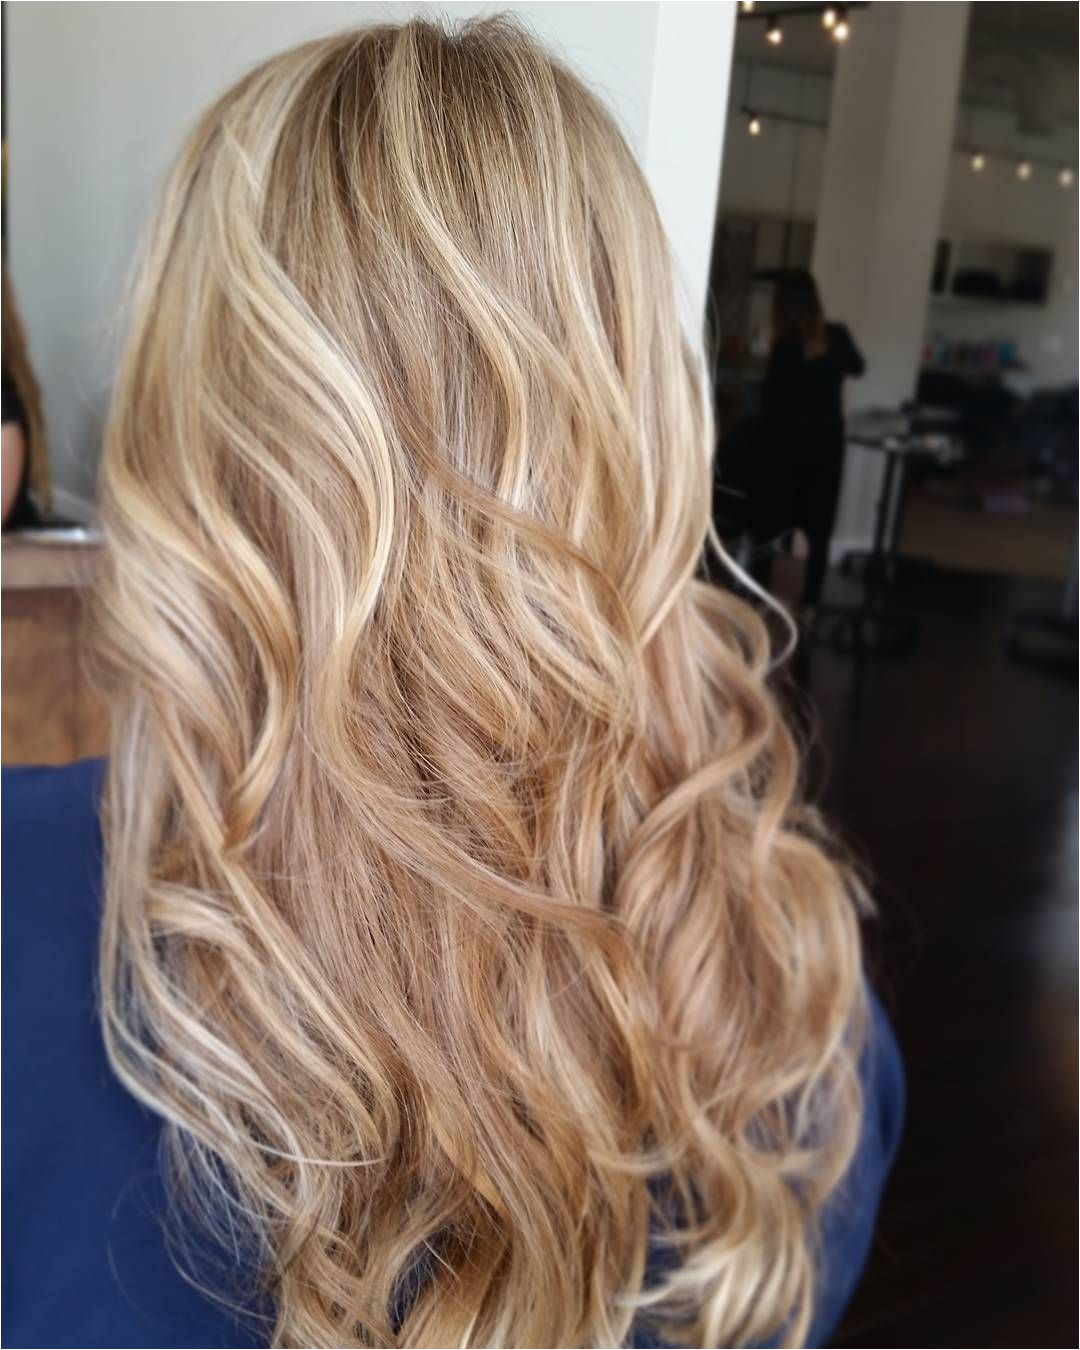 60 Alluring Designs for Blonde Hair with Lowlights and Highlights — More Dimension for Your Hair